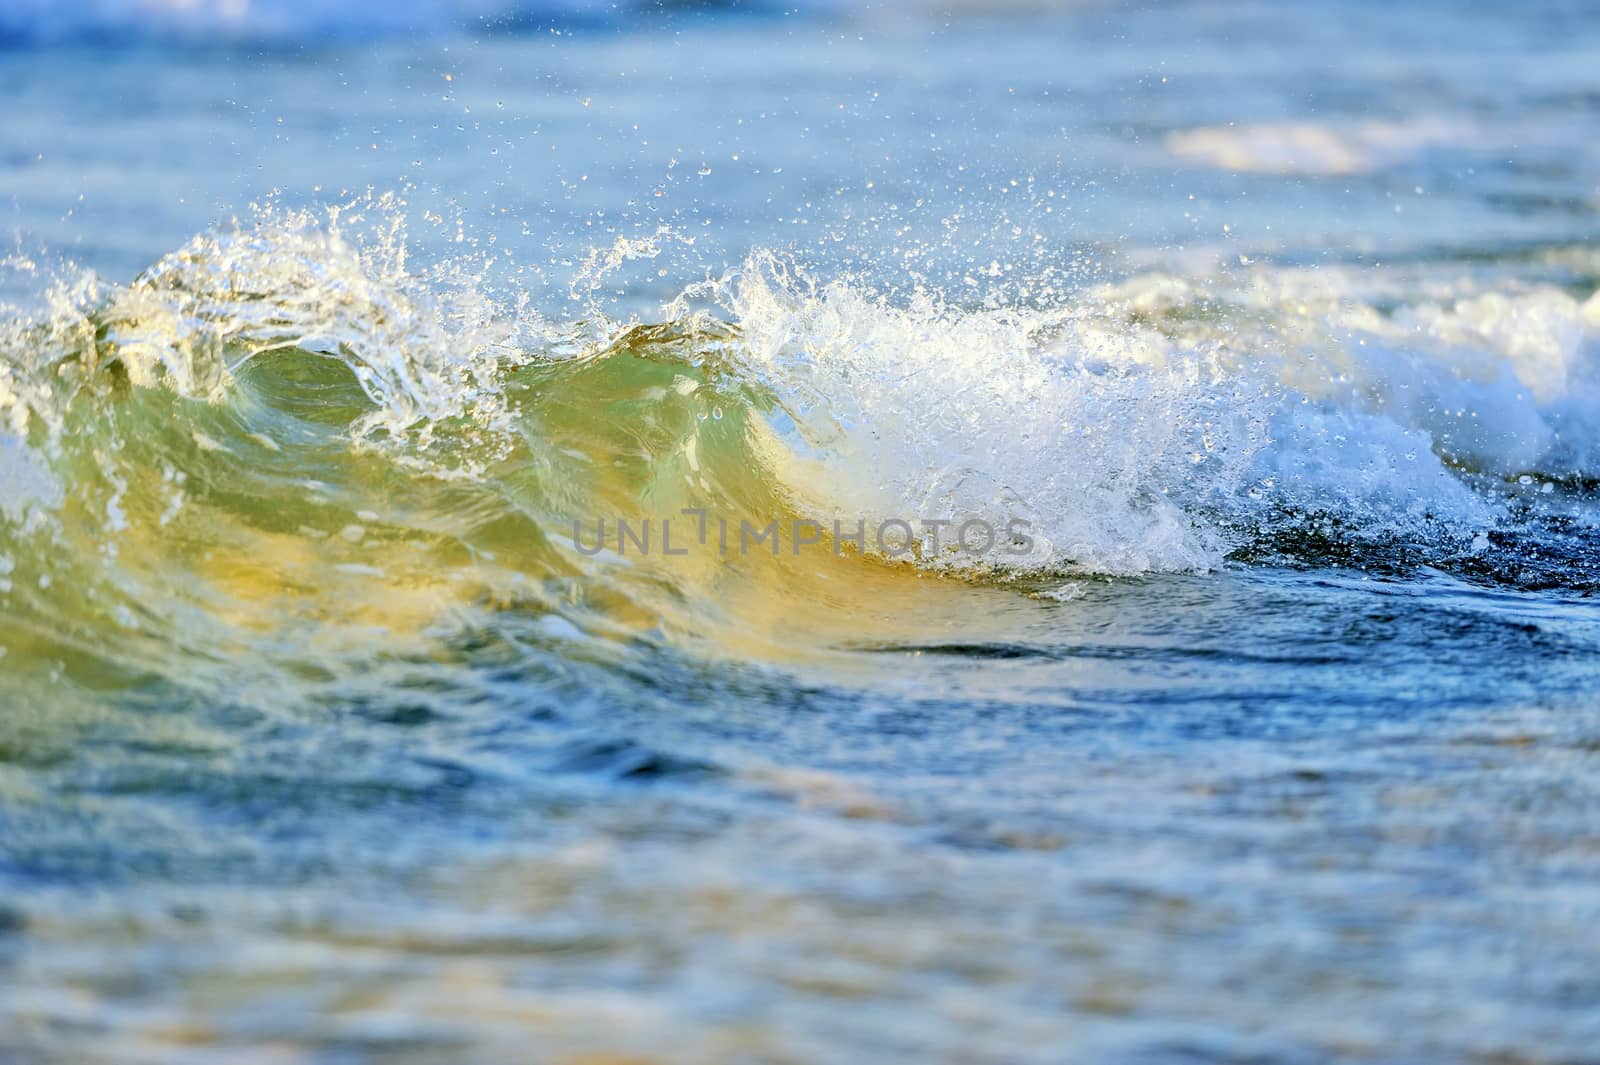 Beach Wave, view in the tube with beach in background